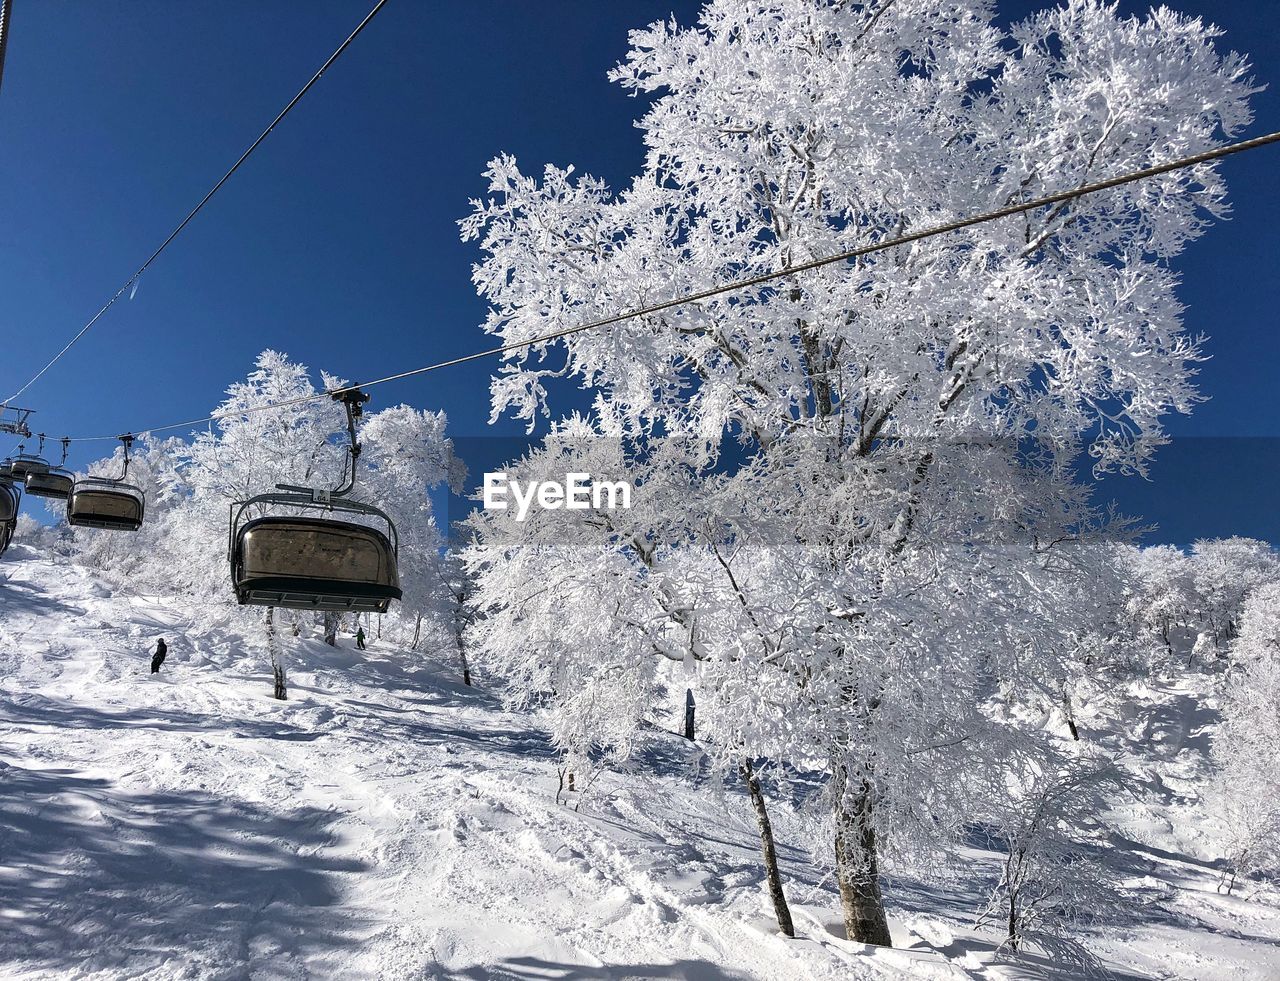 snow, winter, cold temperature, nature, tree, beauty in nature, freezing, sky, plant, white, architecture, landscape, scenics - nature, environment, blue, mountain, frozen, no people, cable car, day, transportation, built structure, land, mountain range, sunlight, cable, tranquil scene, outdoors, travel, clear sky, building exterior, piste, tranquility, ski lift, building, travel destinations, mode of transportation, non-urban scene